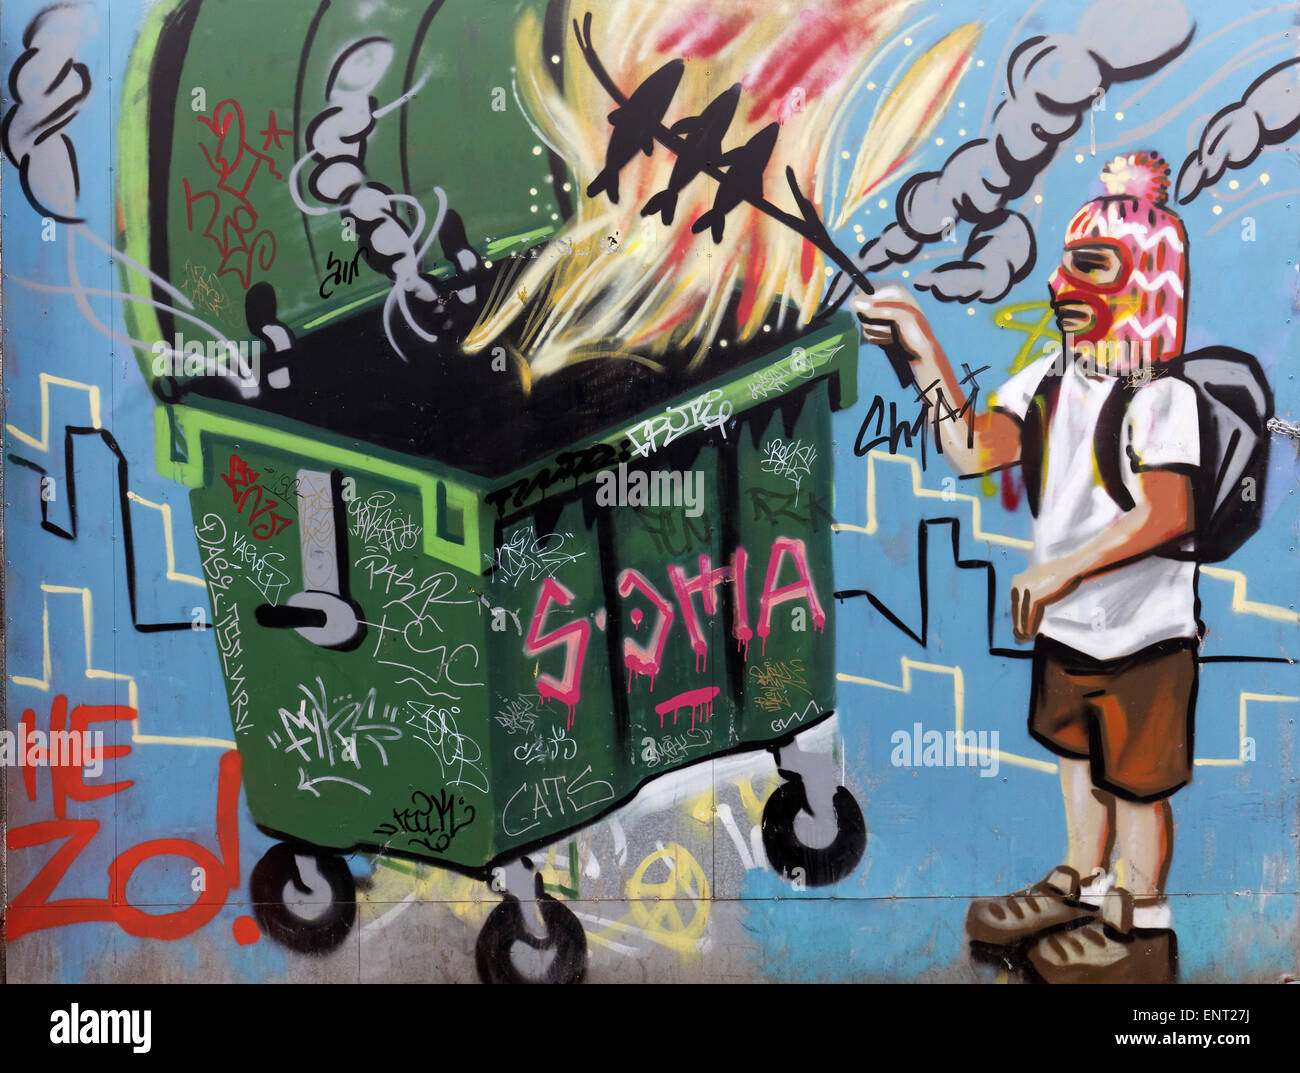 Man with facemask grilling fish over a fire in a dumpster, mural, street art, Palma de Majorca, Majorca, Balearic Islands, Spain Stock Photo